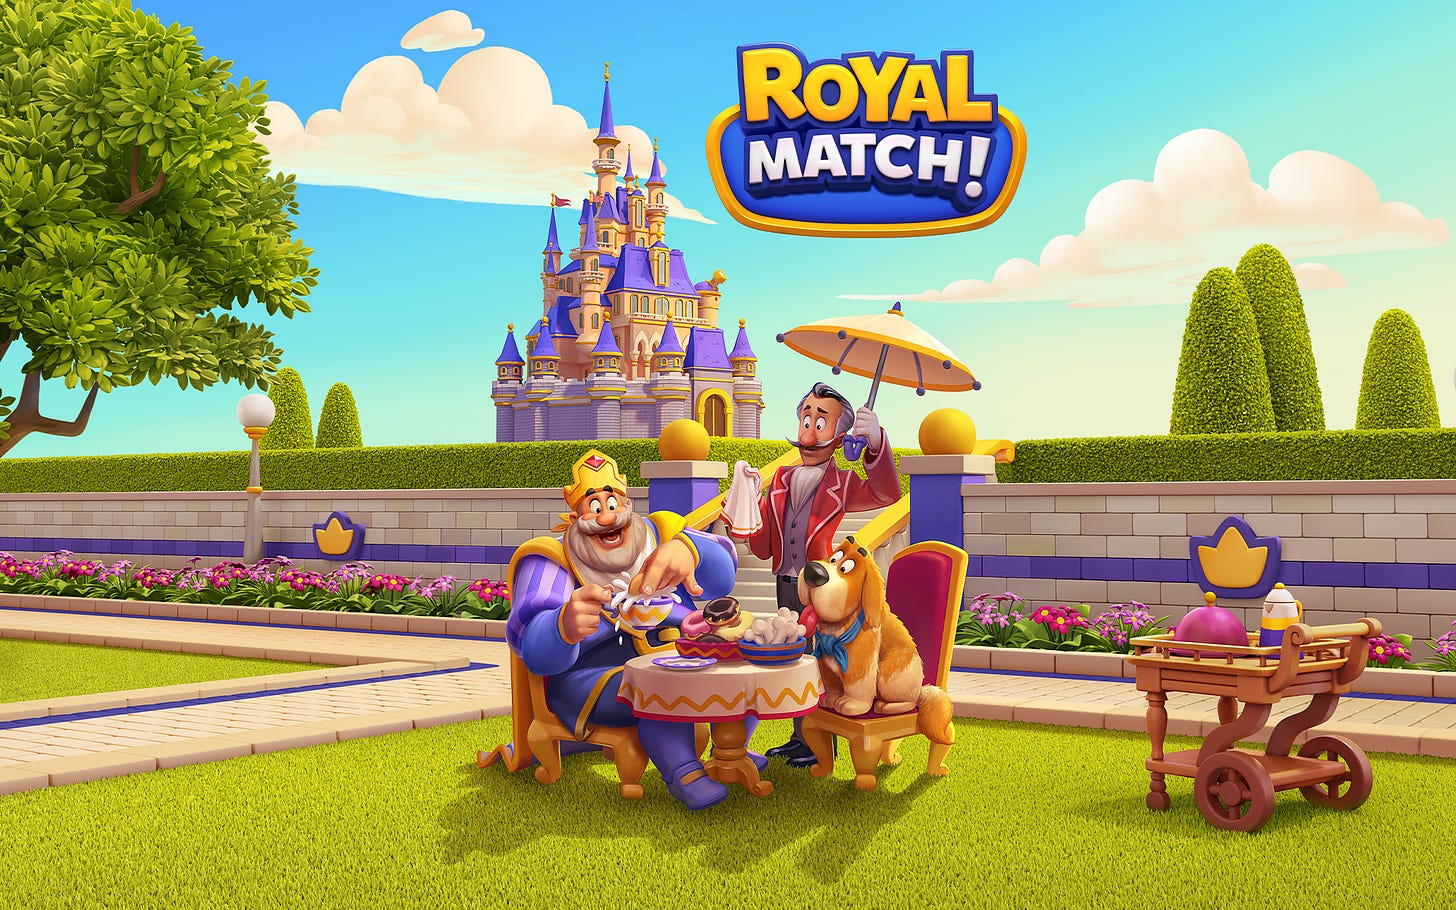 Royal Match:Amazon.com:Appstore for Android